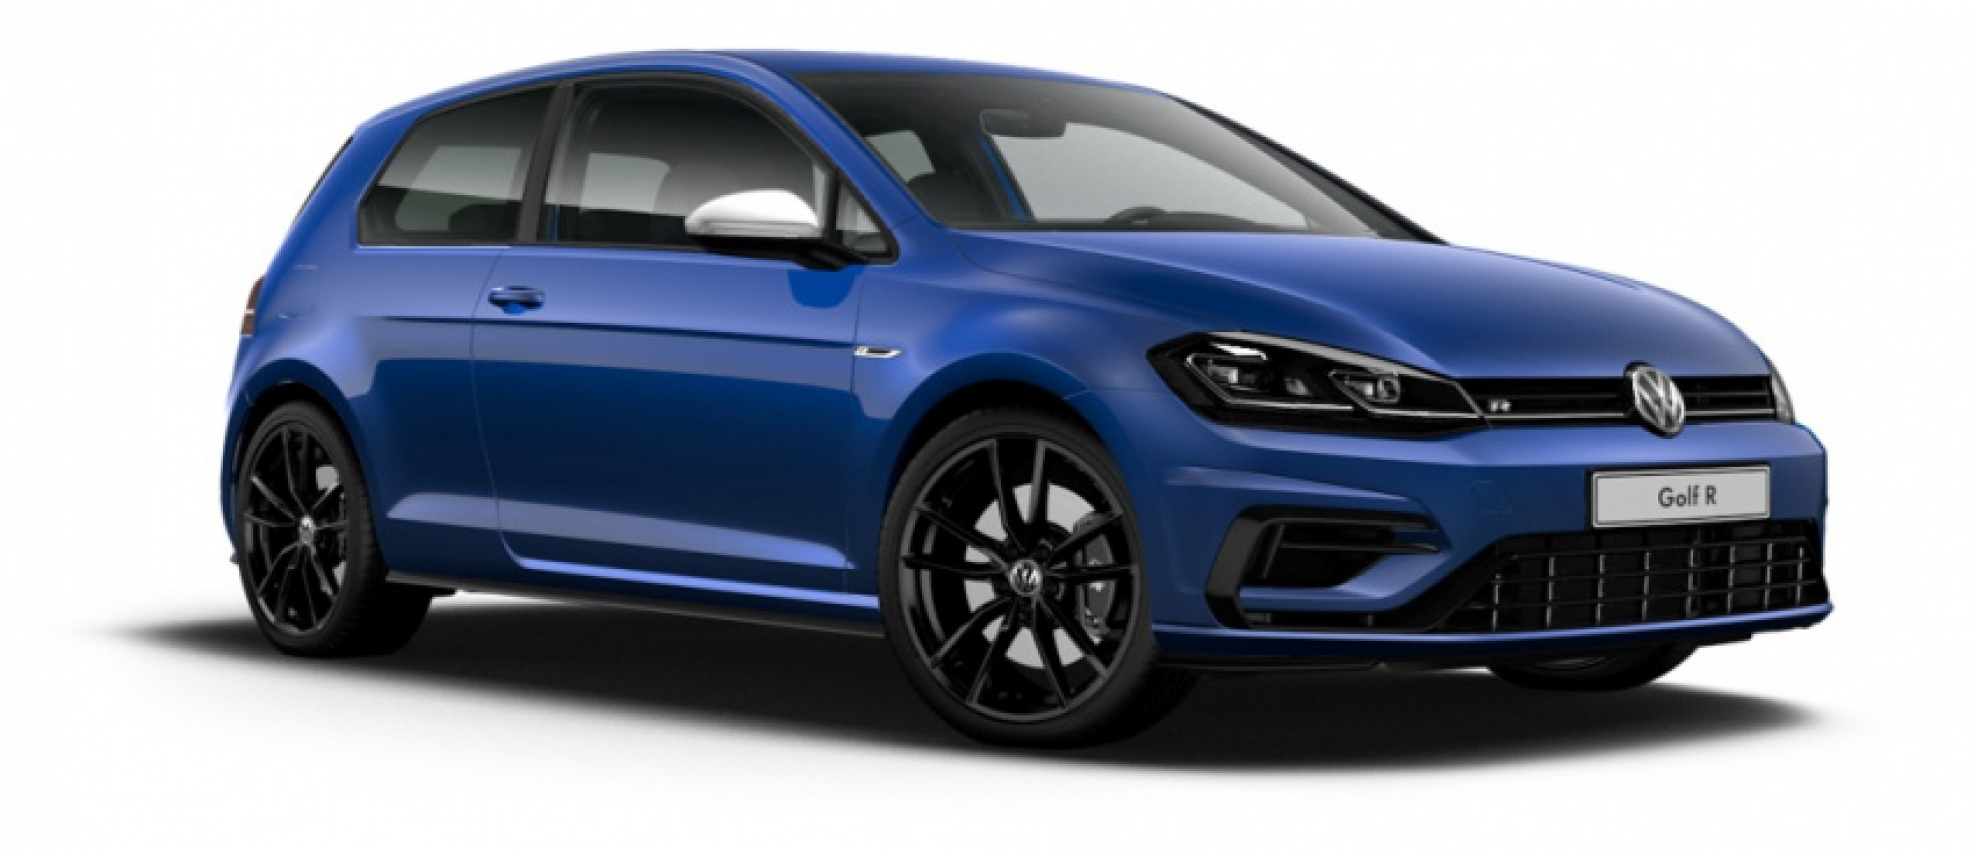 autos, car brands, cars, volkswagen, malaysia, limited units of 3-door volkswagen golf r available in malaysia